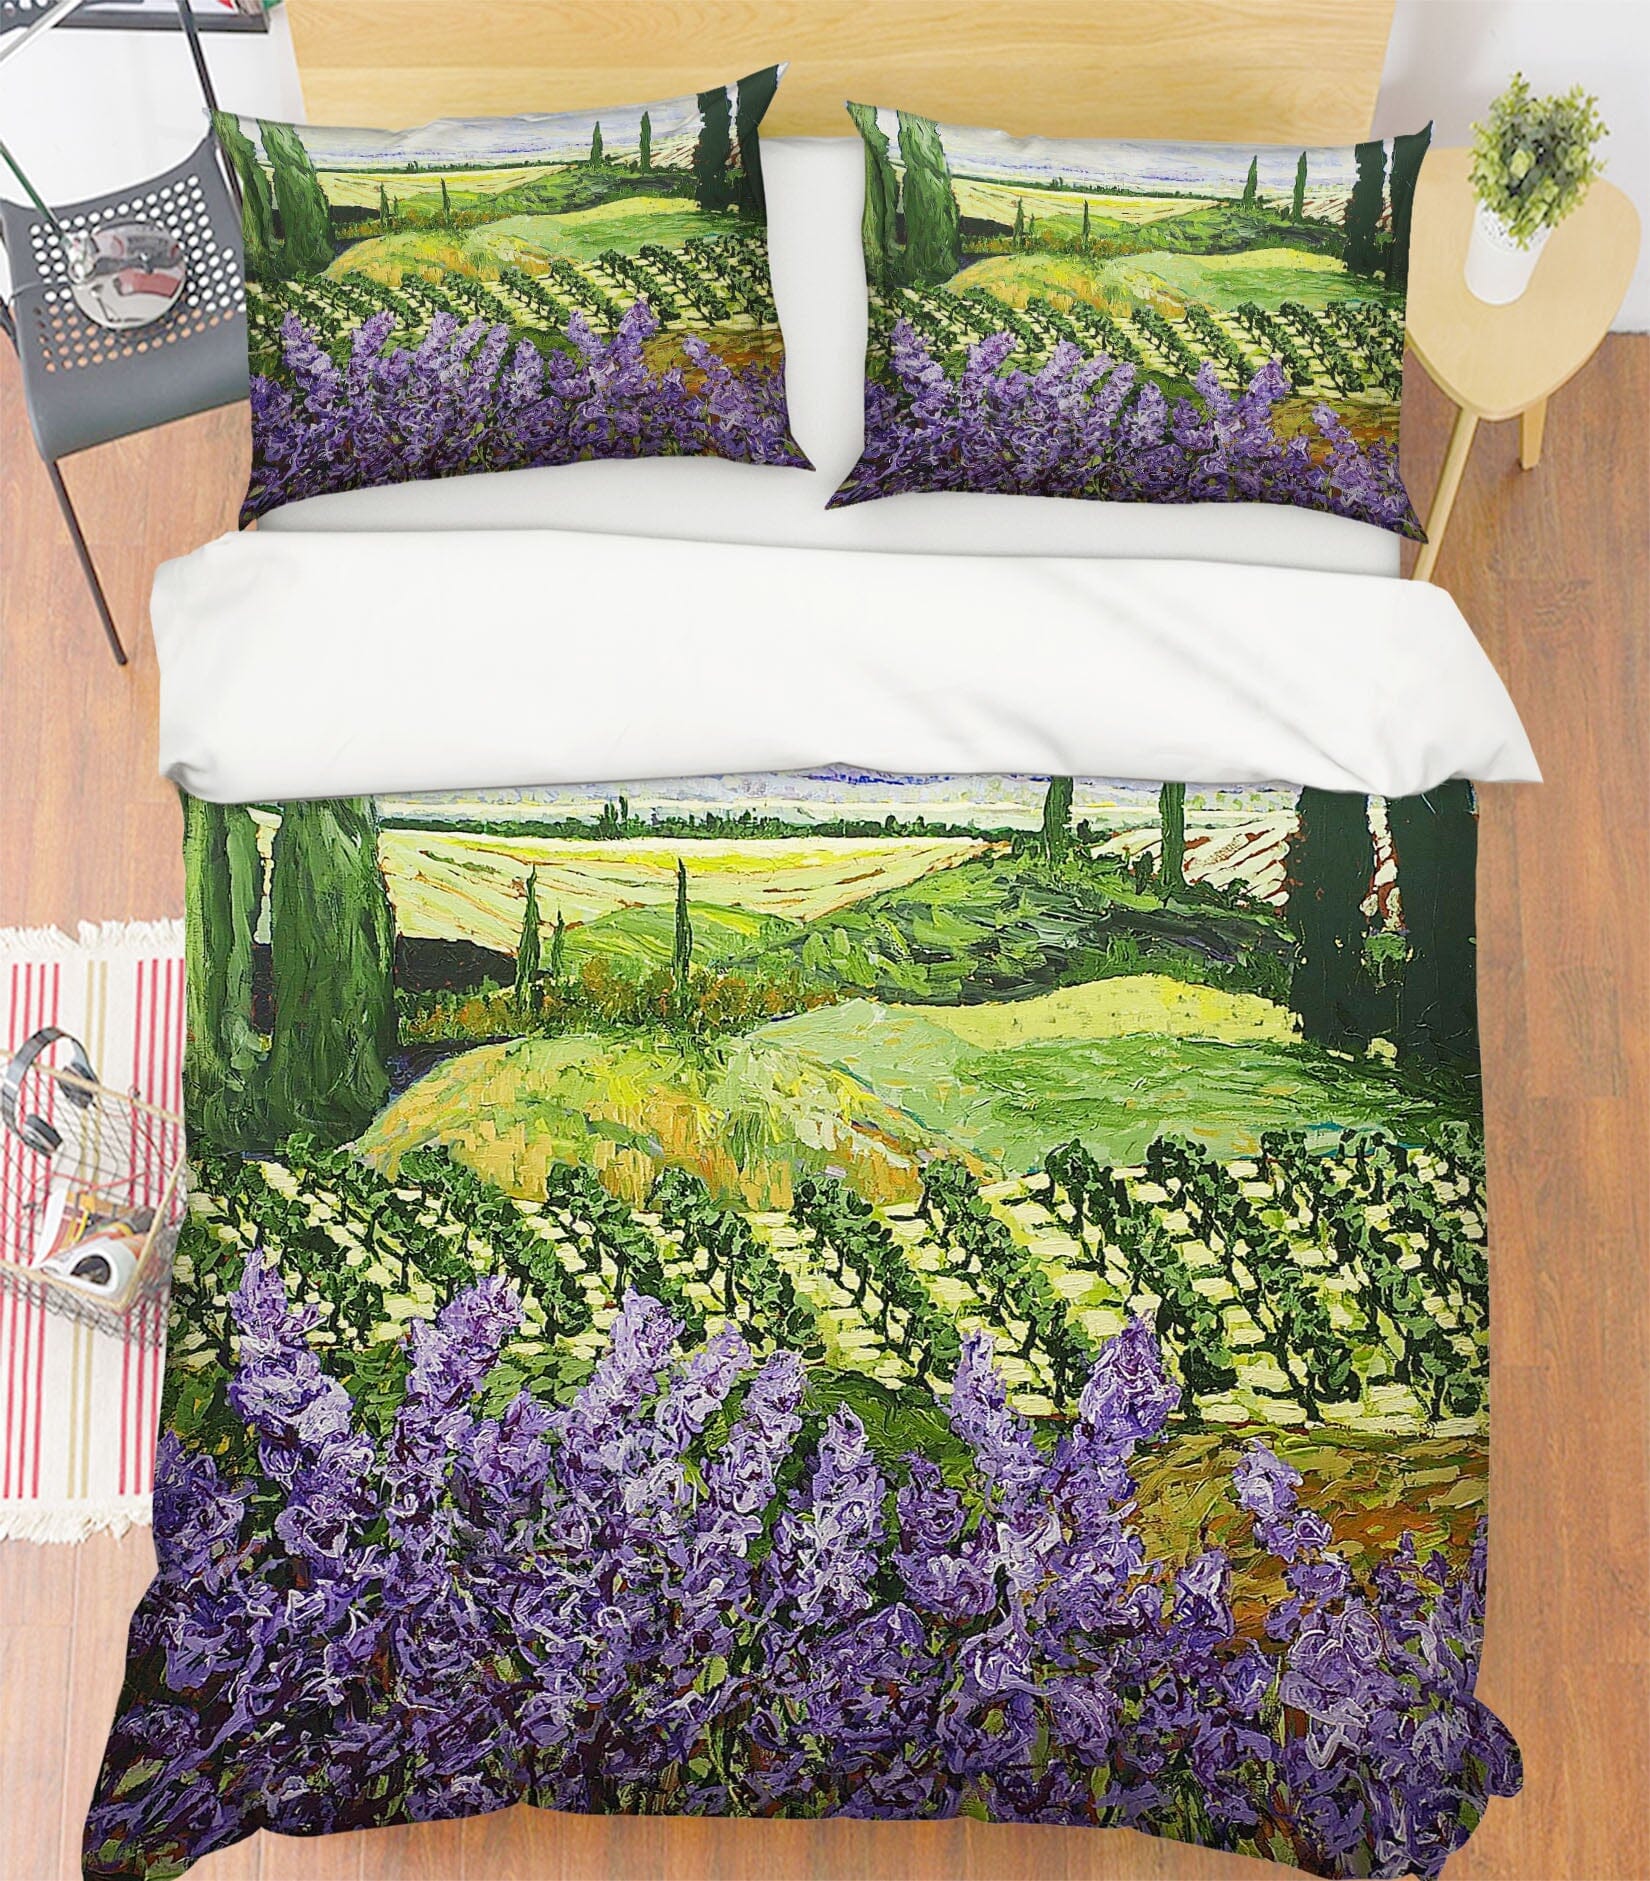 3D Chinaberry Hill 2118 Allan P. Friedlander Bedding Bed Pillowcases Quilt Quiet Covers AJ Creativity Home 